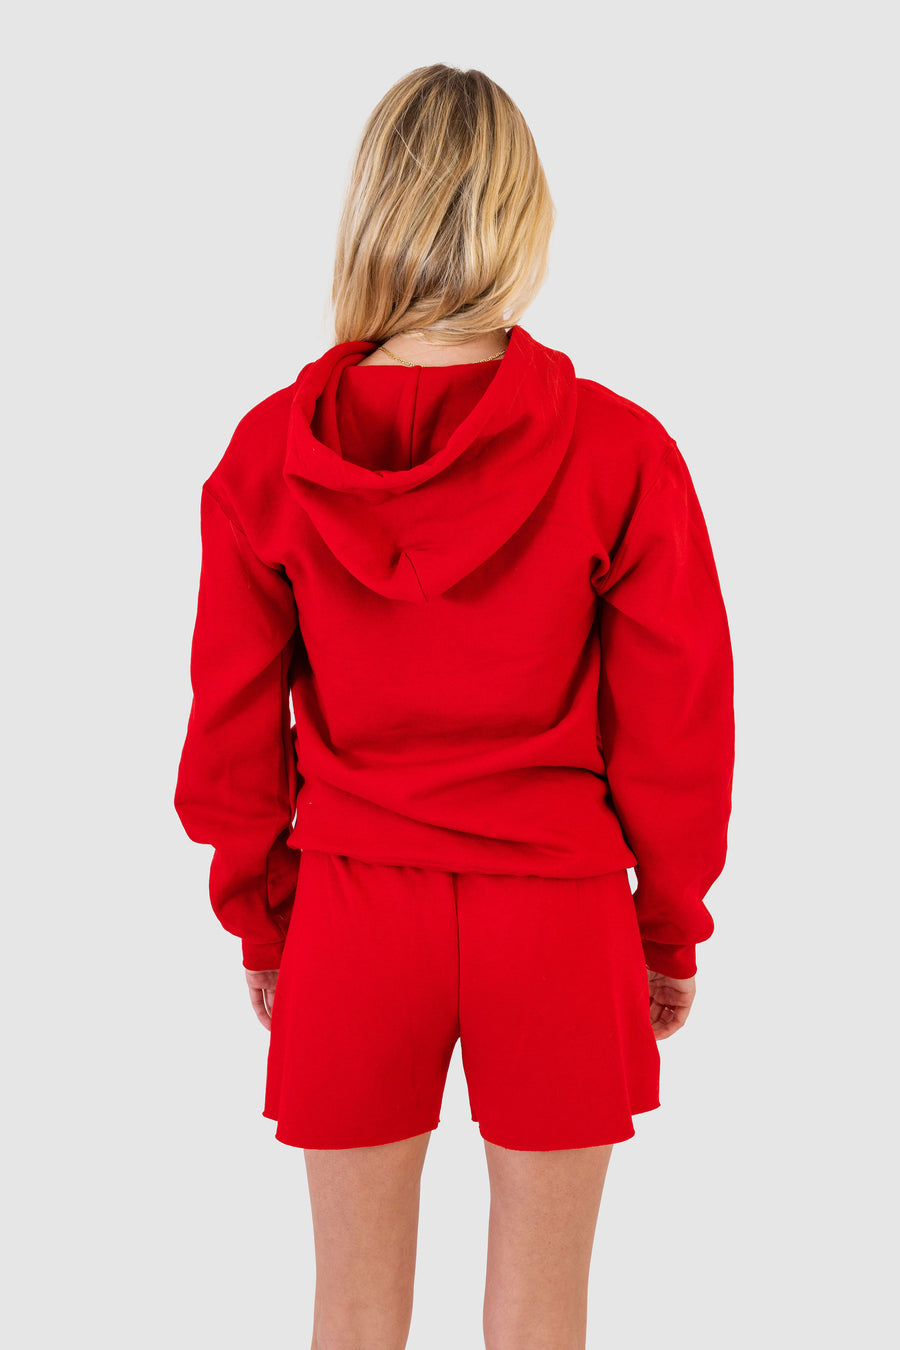 KOCH SWEAT SET IN RED *LIMITED*EDITION*